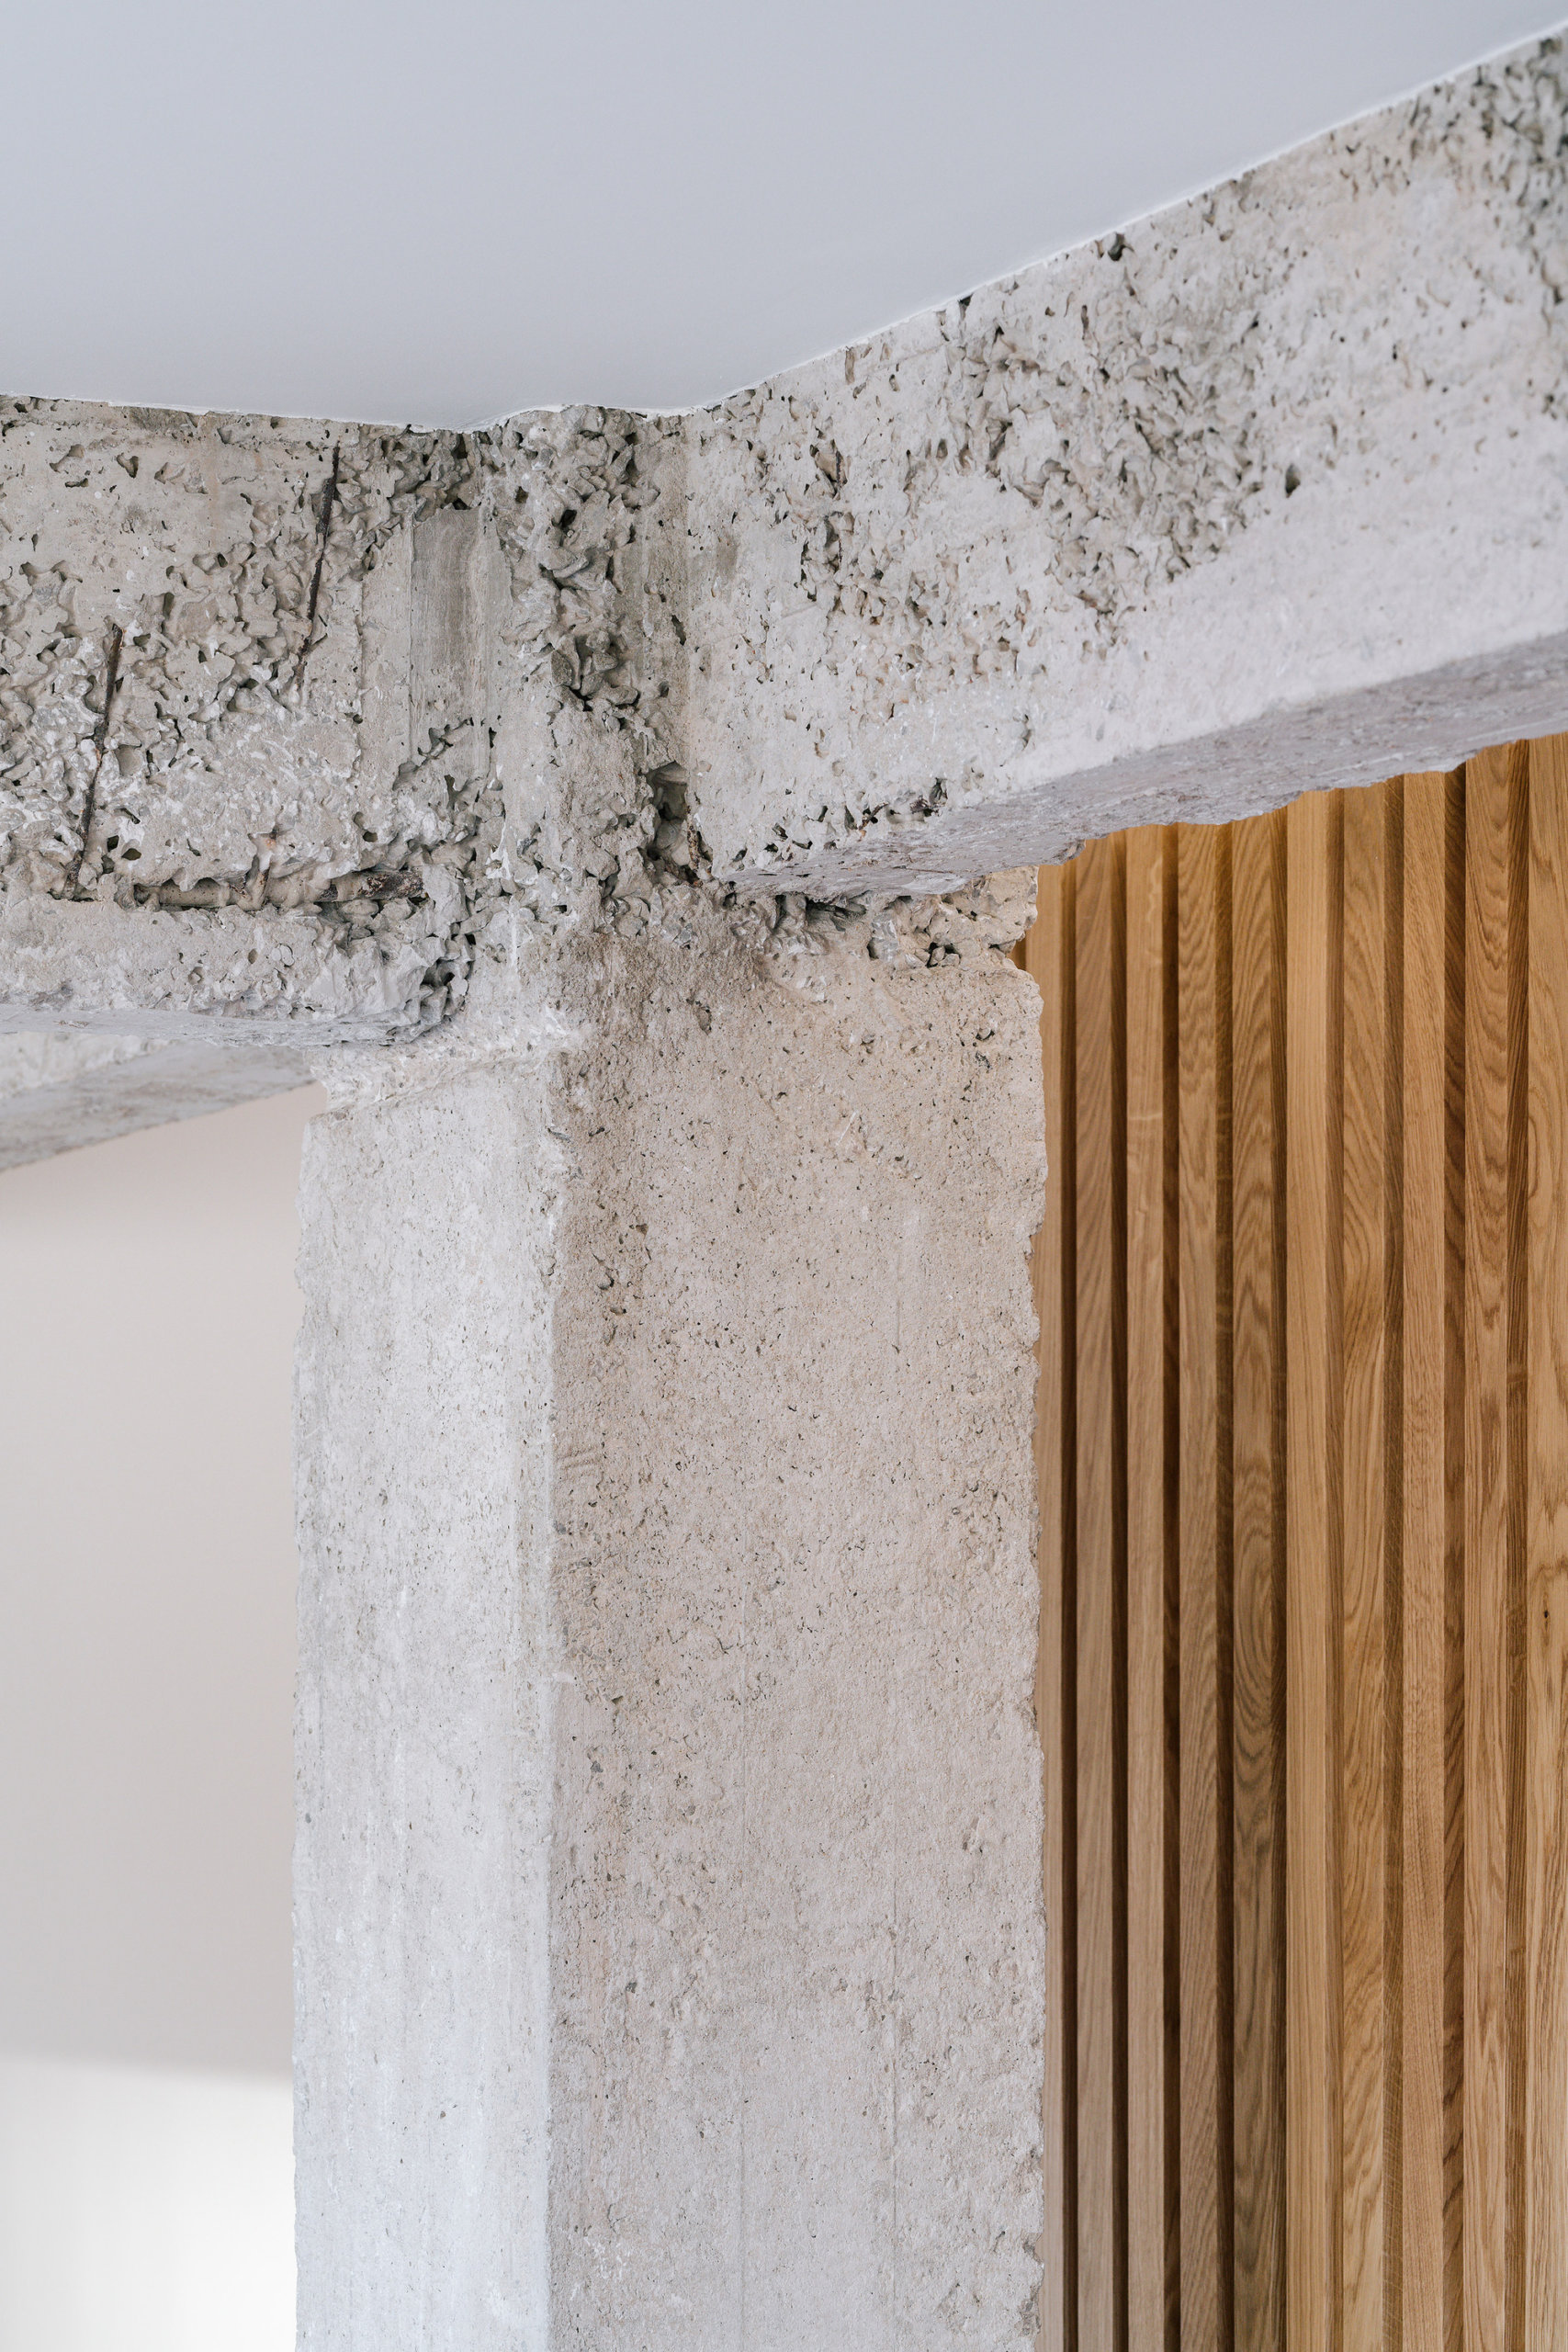 Combining the rugged concrete finishes inside the apartment with warmth of wood